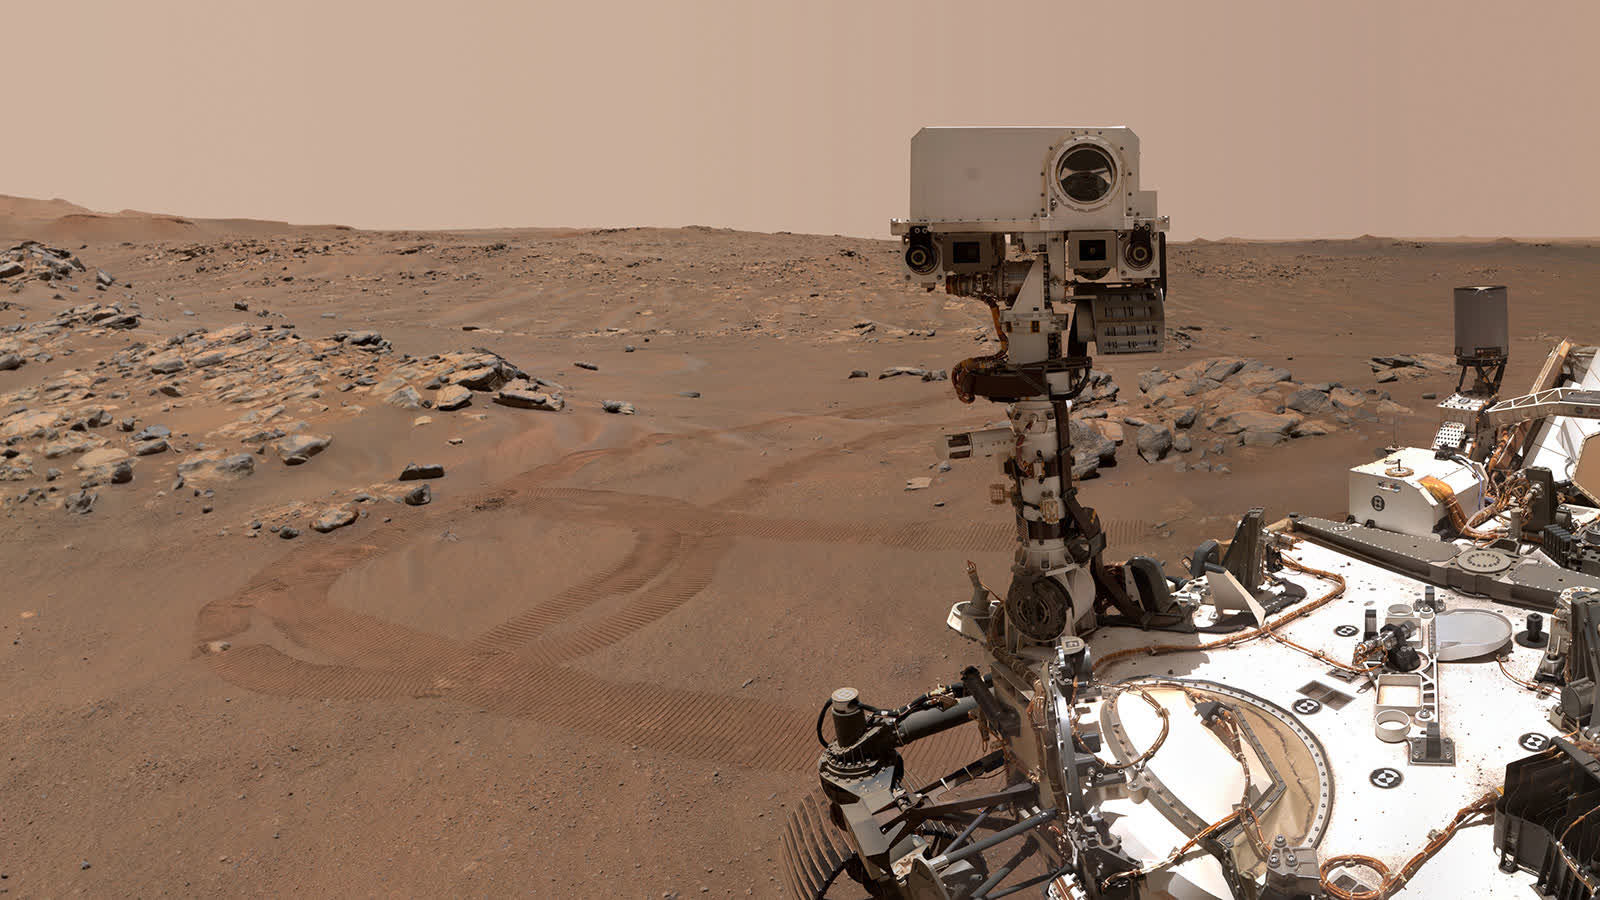 Communication with Mars rover has been restored after multi-week blackout